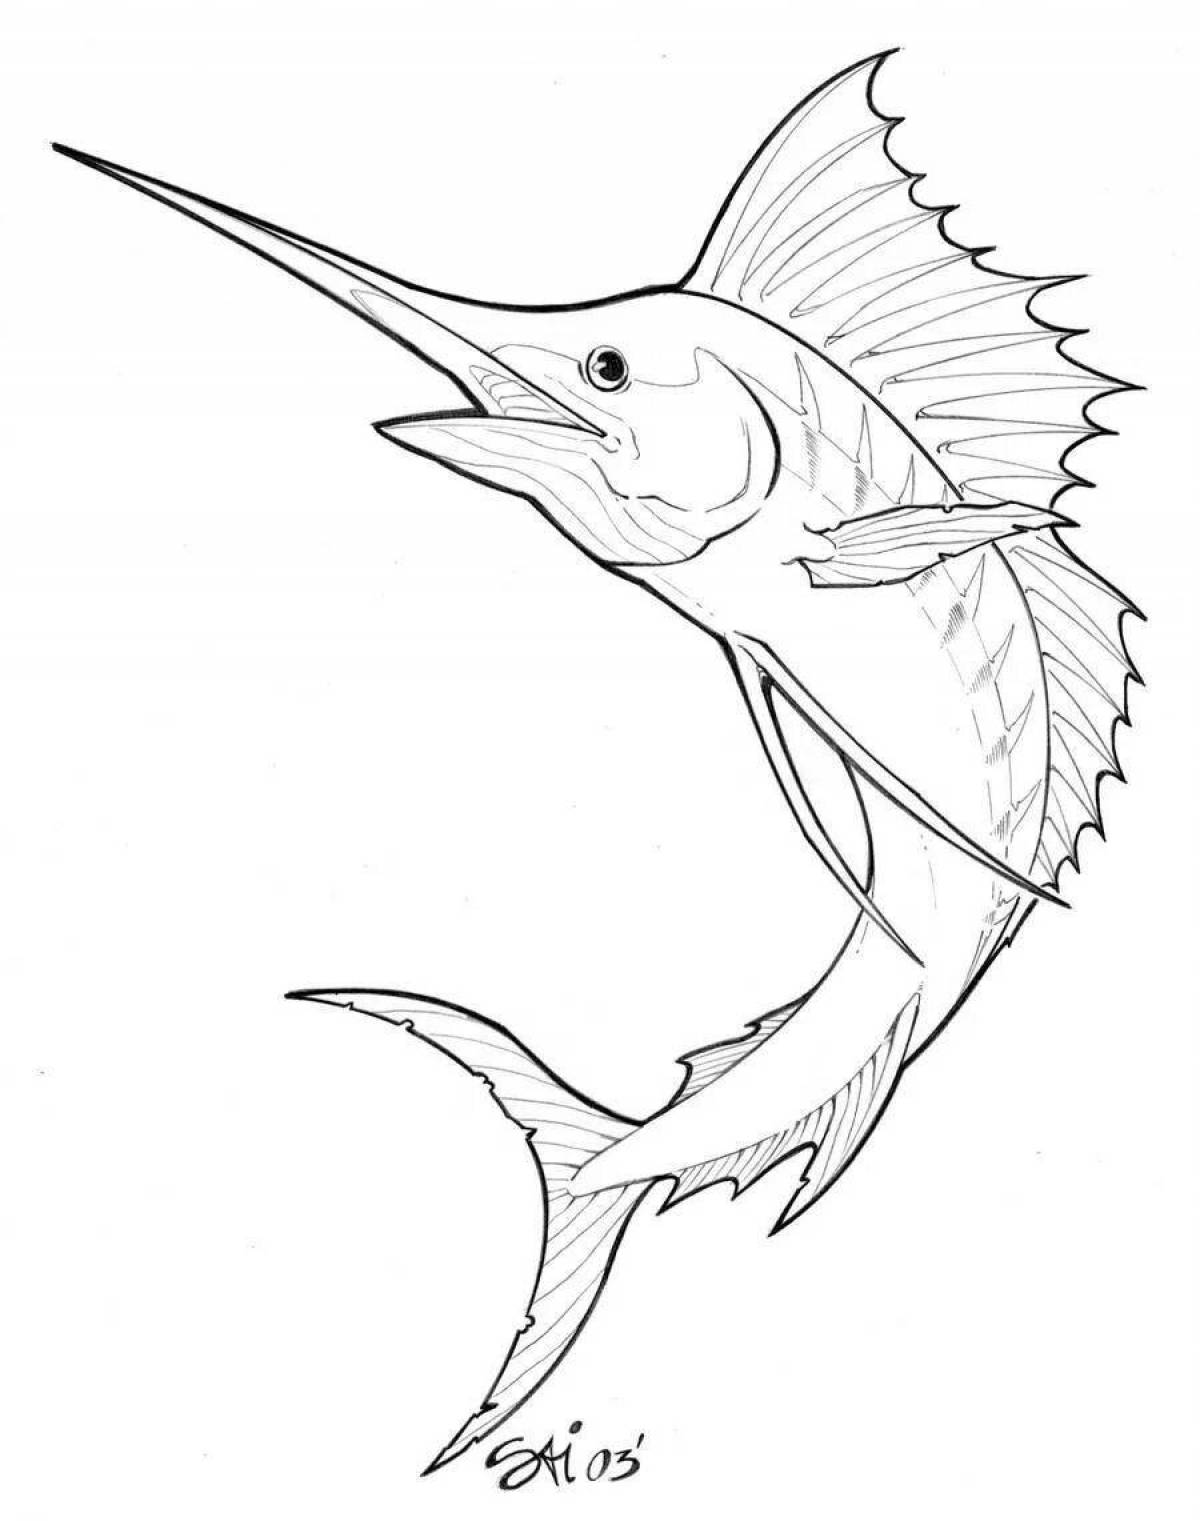 Exquisite sailfish coloring page